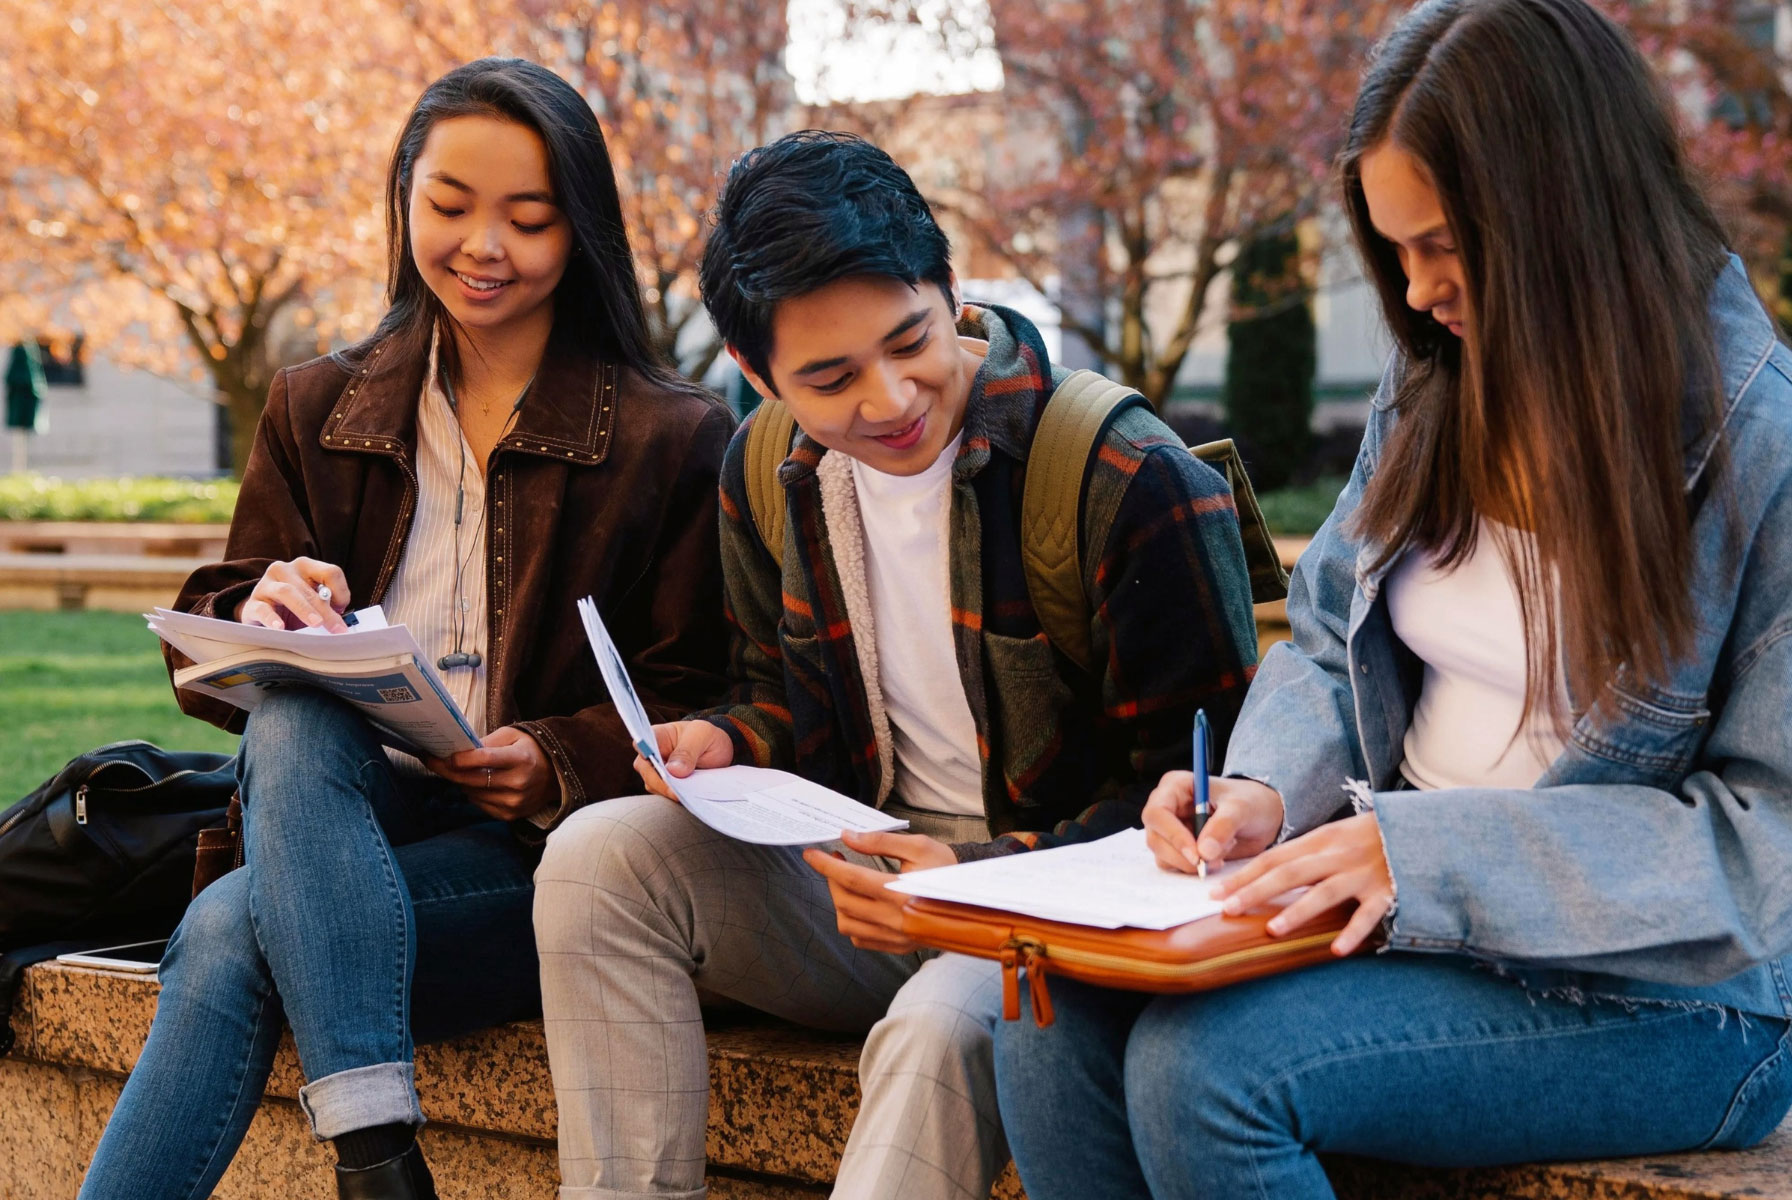 Group of students smiling while sitting on bench outside and studying together